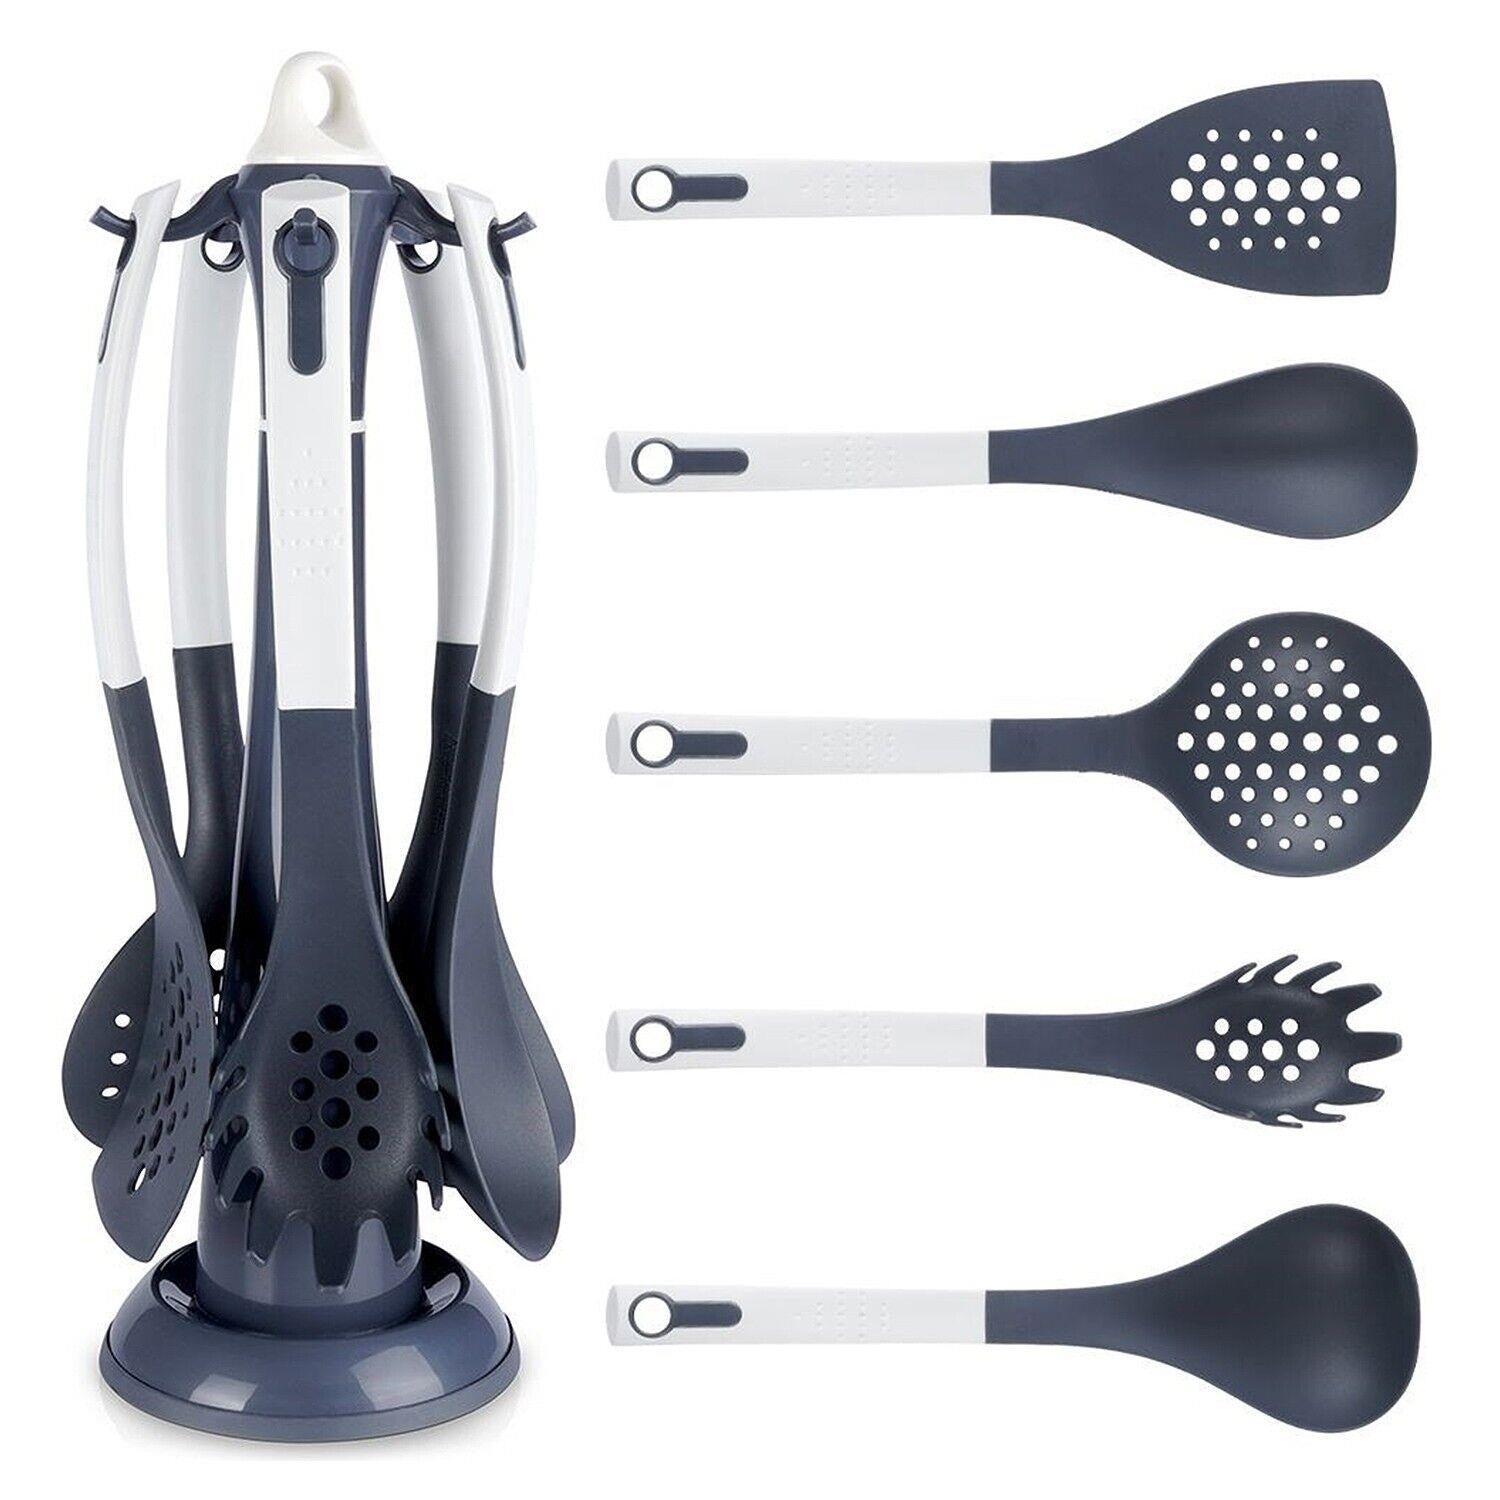 6 Pcs Kitchen Tool Set with a Stand by GEEZY - UKBuyZone